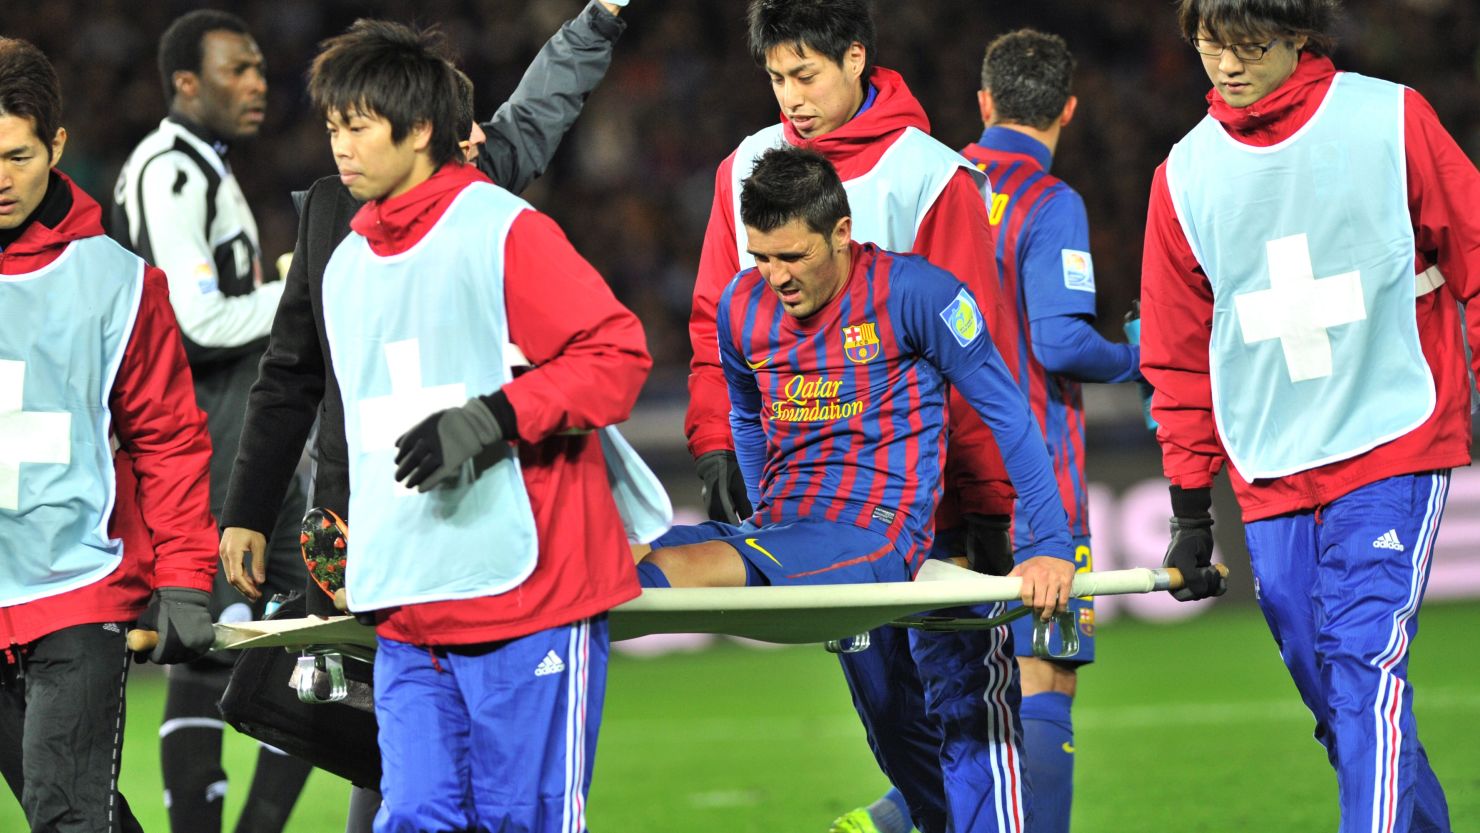 Spain striker David Villa had recently lost his place in the Barcelona team to Chile's Alexis Sanchez.